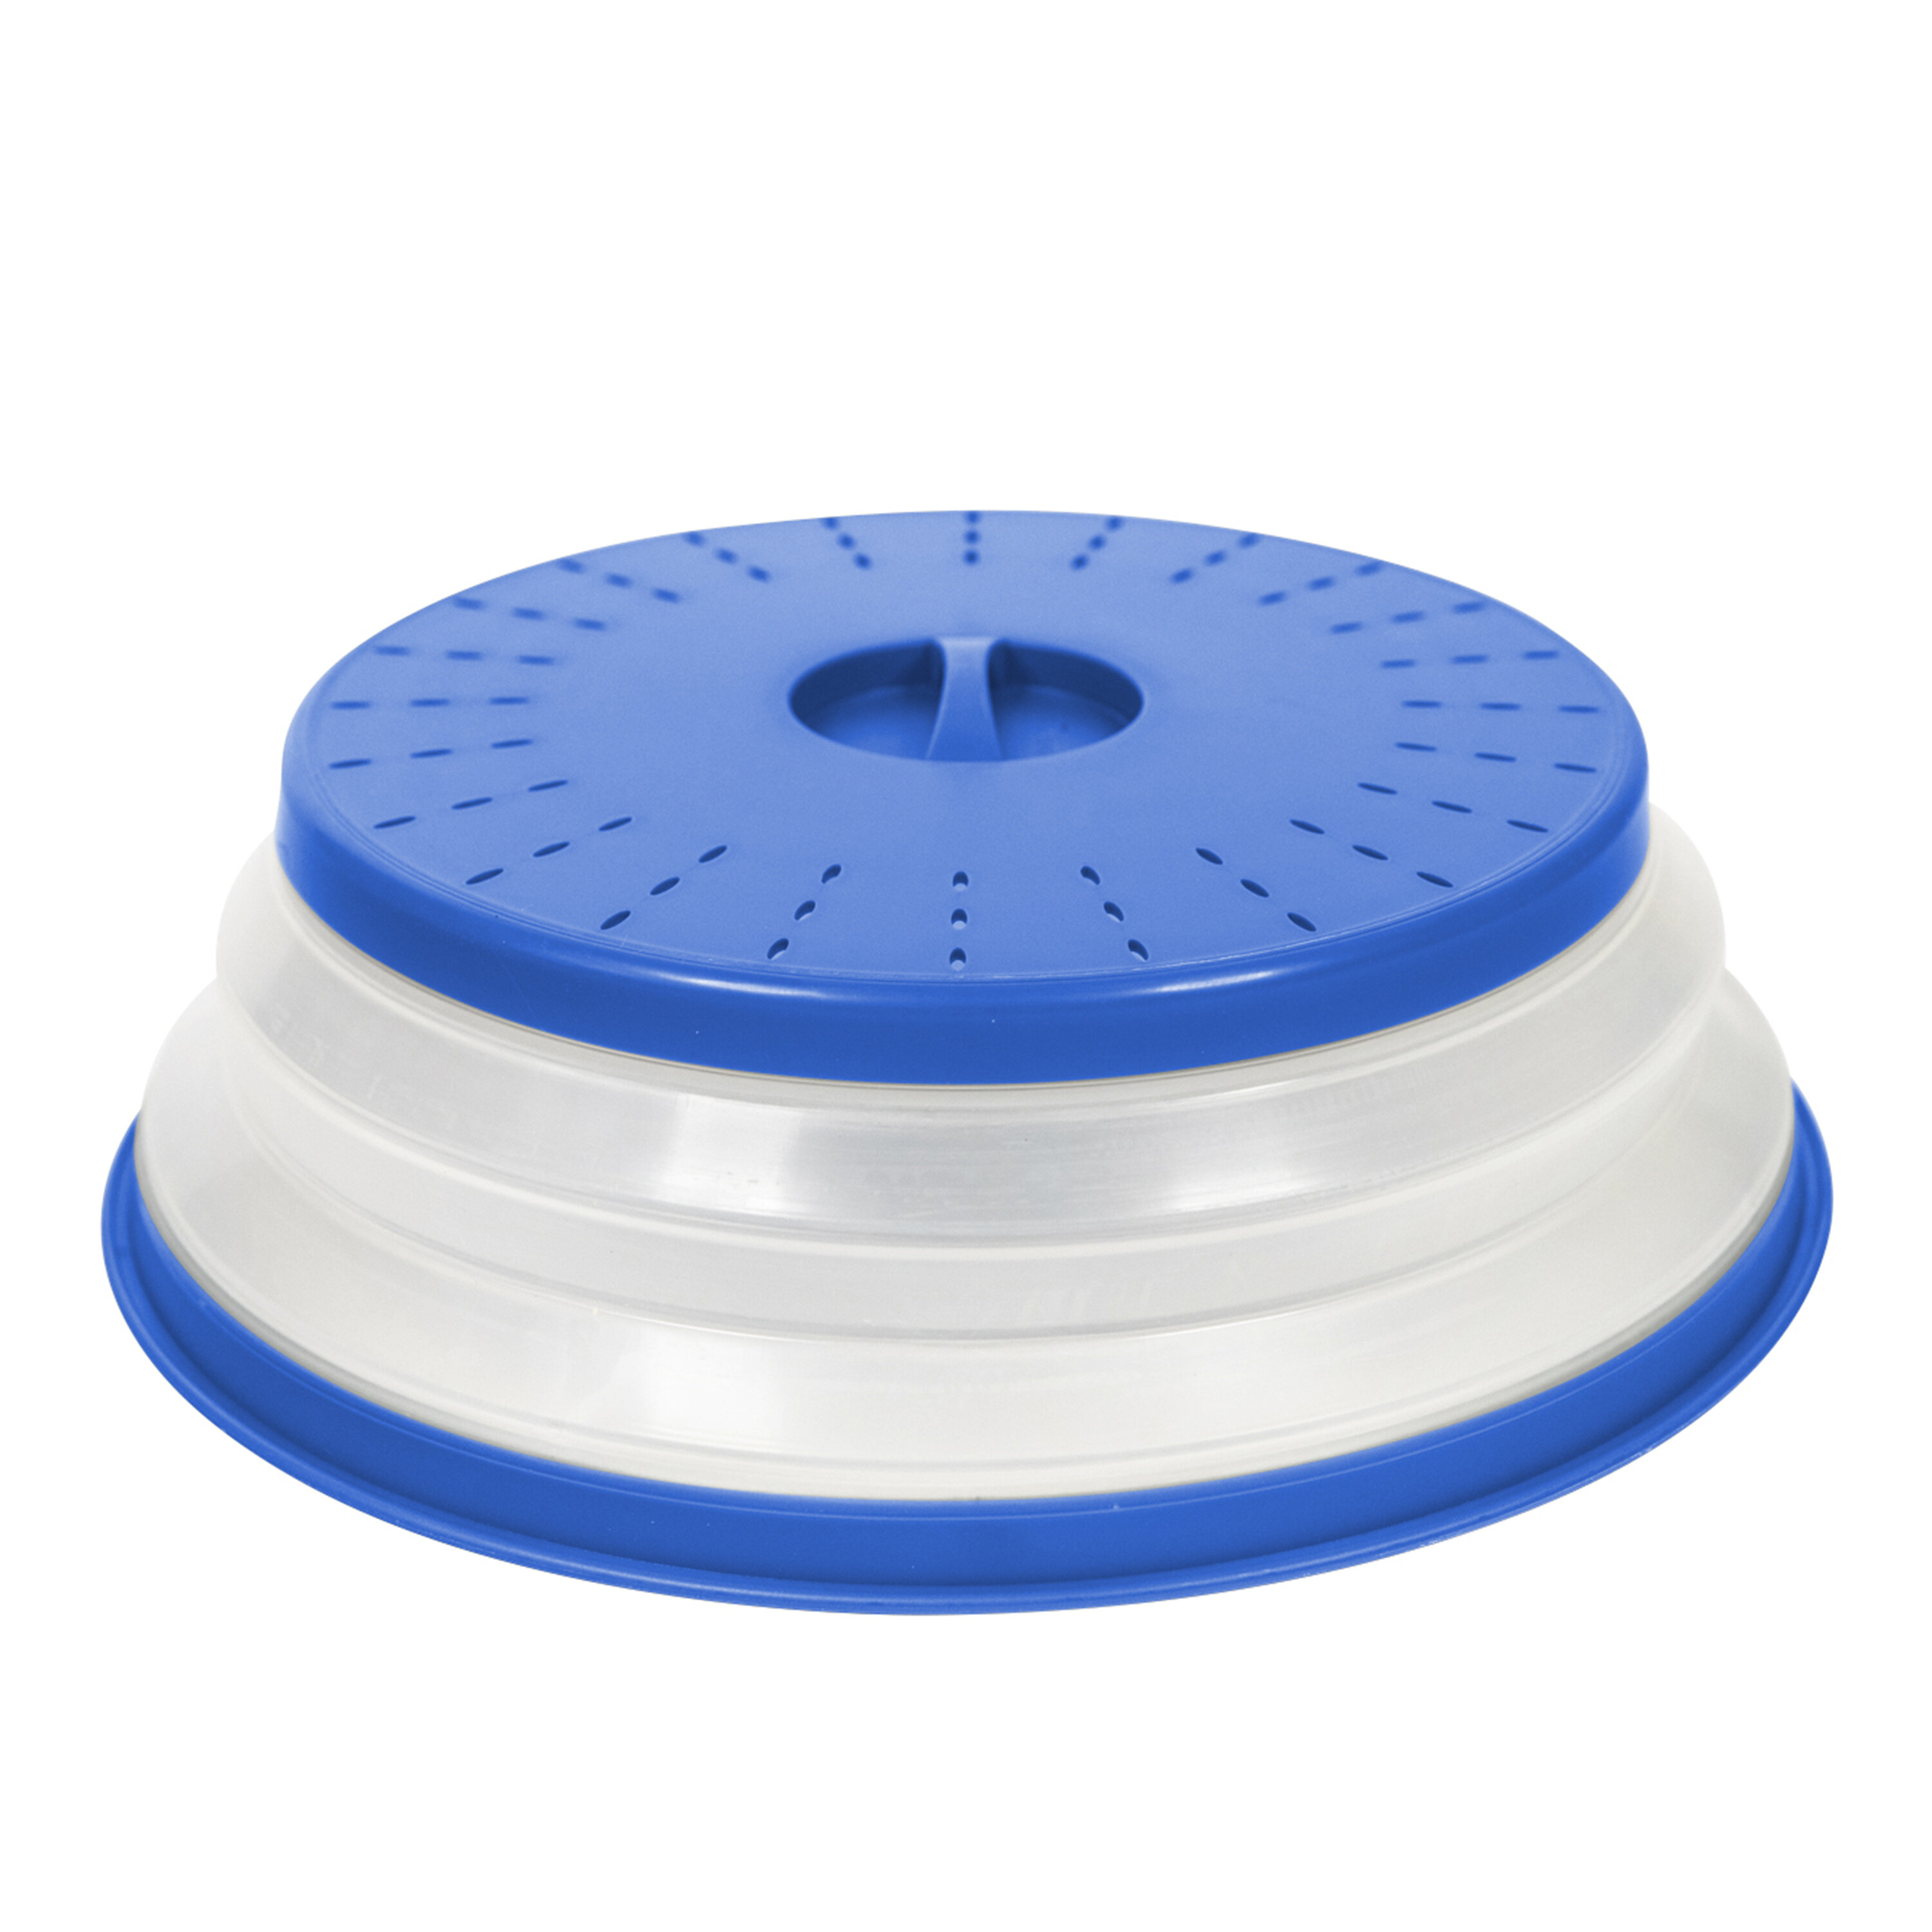 Universal Silicone Glass Lid Cover Heat-Resistant with Steam Hole